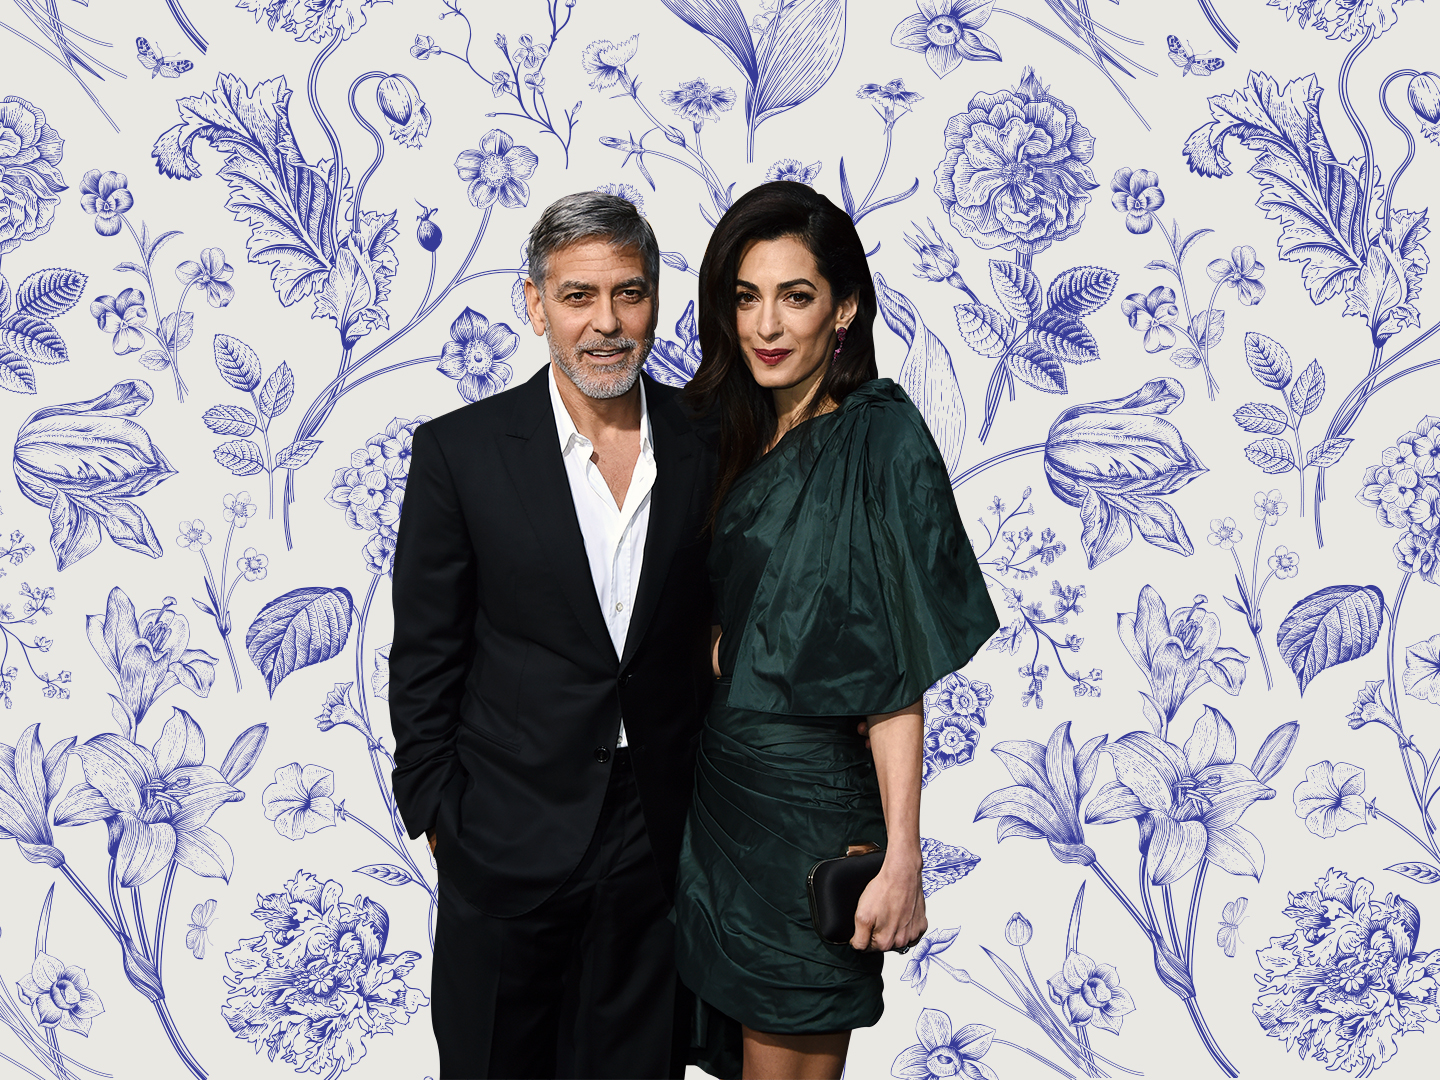 George Clooney & Amal's Twins: What to Know About Ella & Alexander